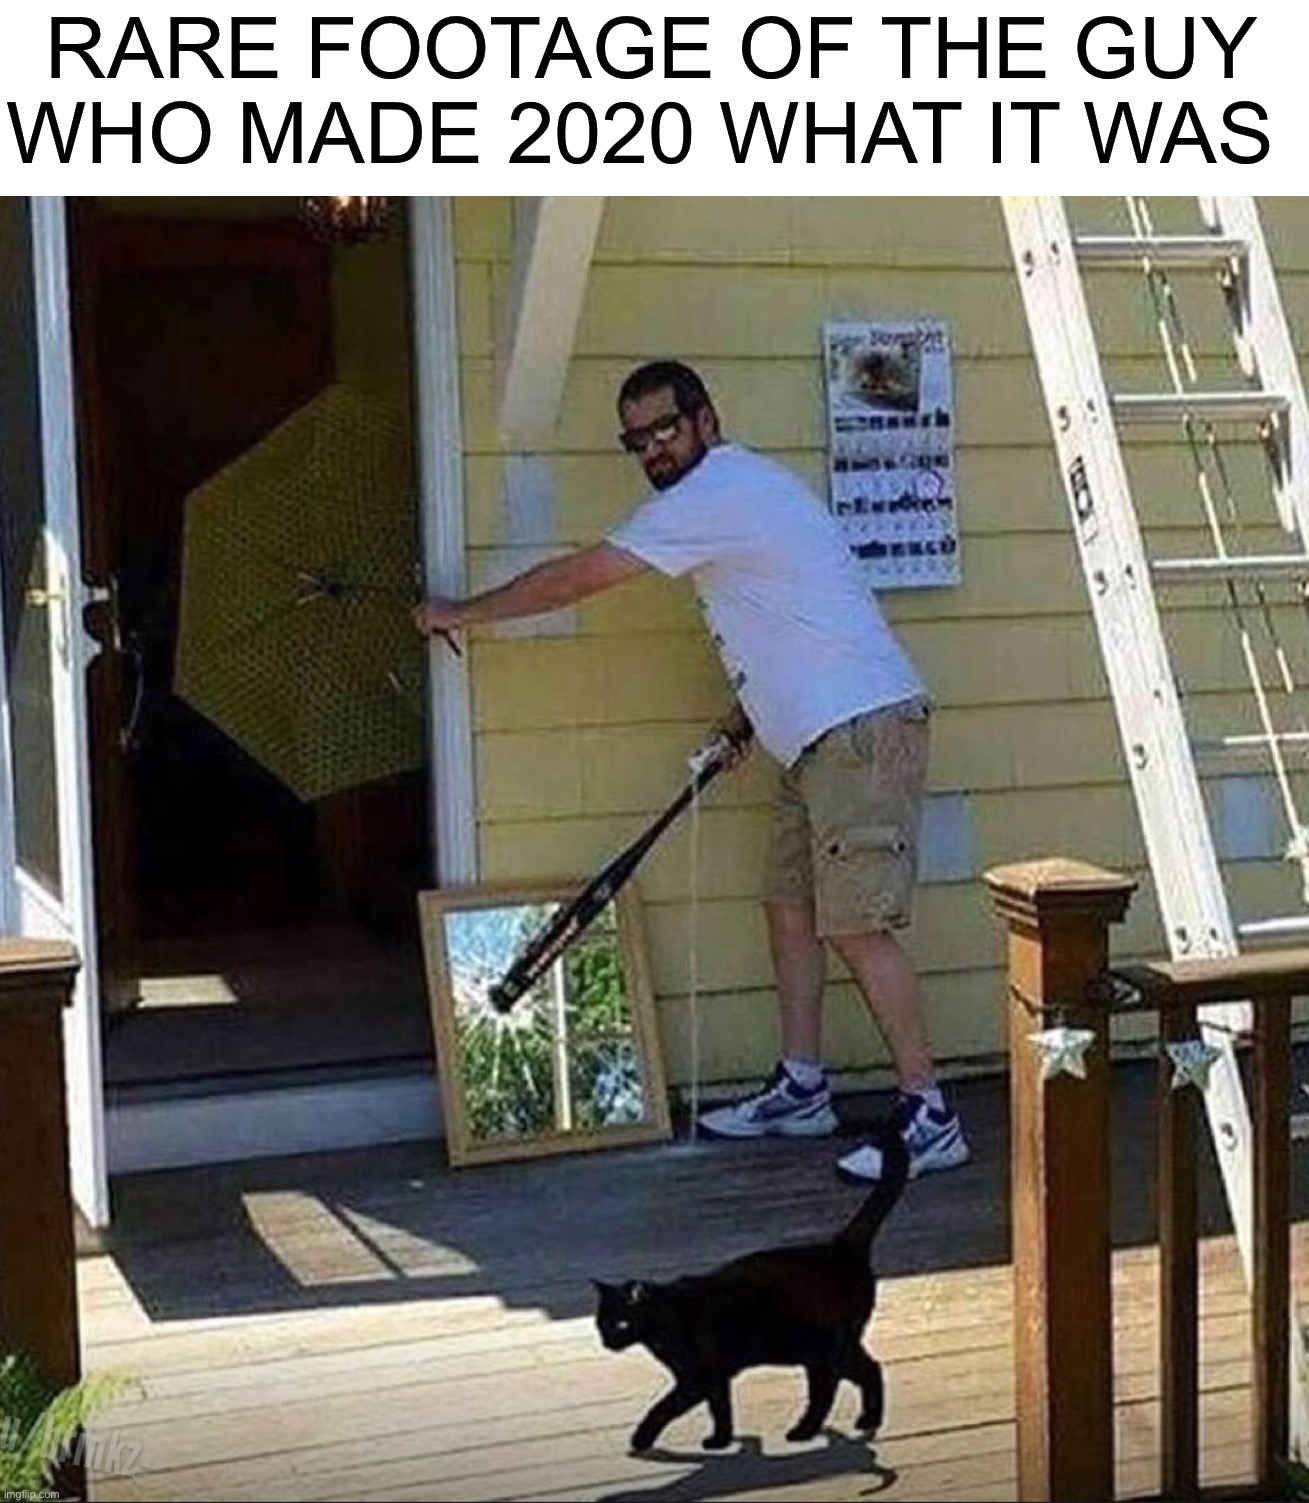 Evil man |  RARE FOOTAGE OF THE GUY WHO MADE 2020 WHAT IT WAS | image tagged in memes,funny,evil,2020,unlucky,bad luck | made w/ Imgflip meme maker